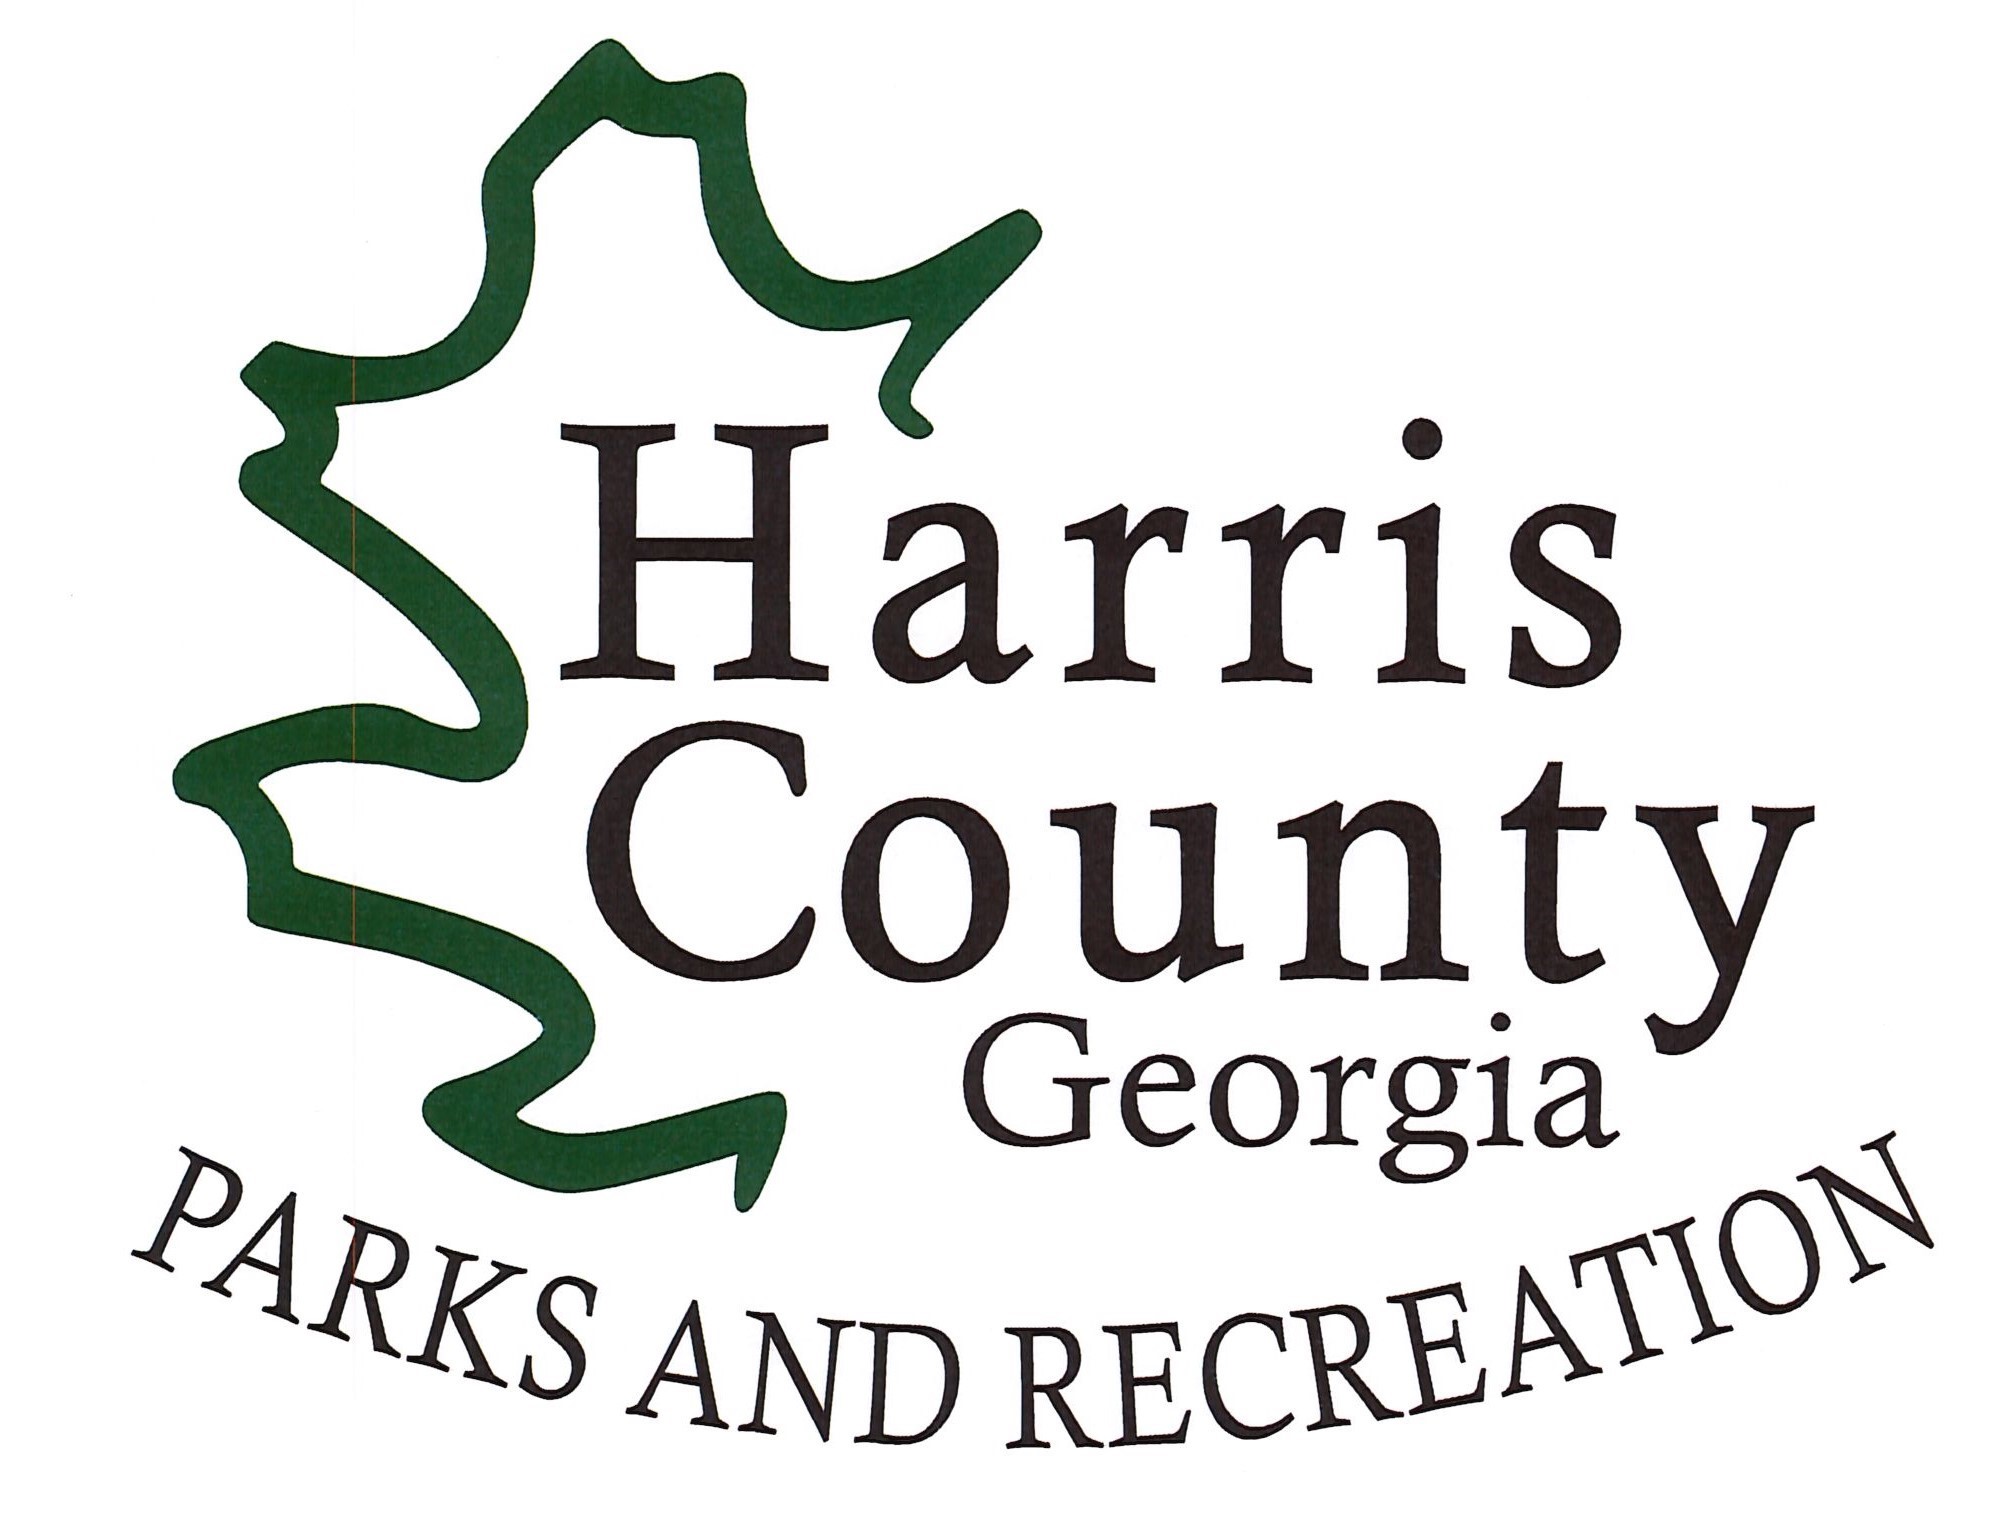 Welcome to the Harris County Recreation Department